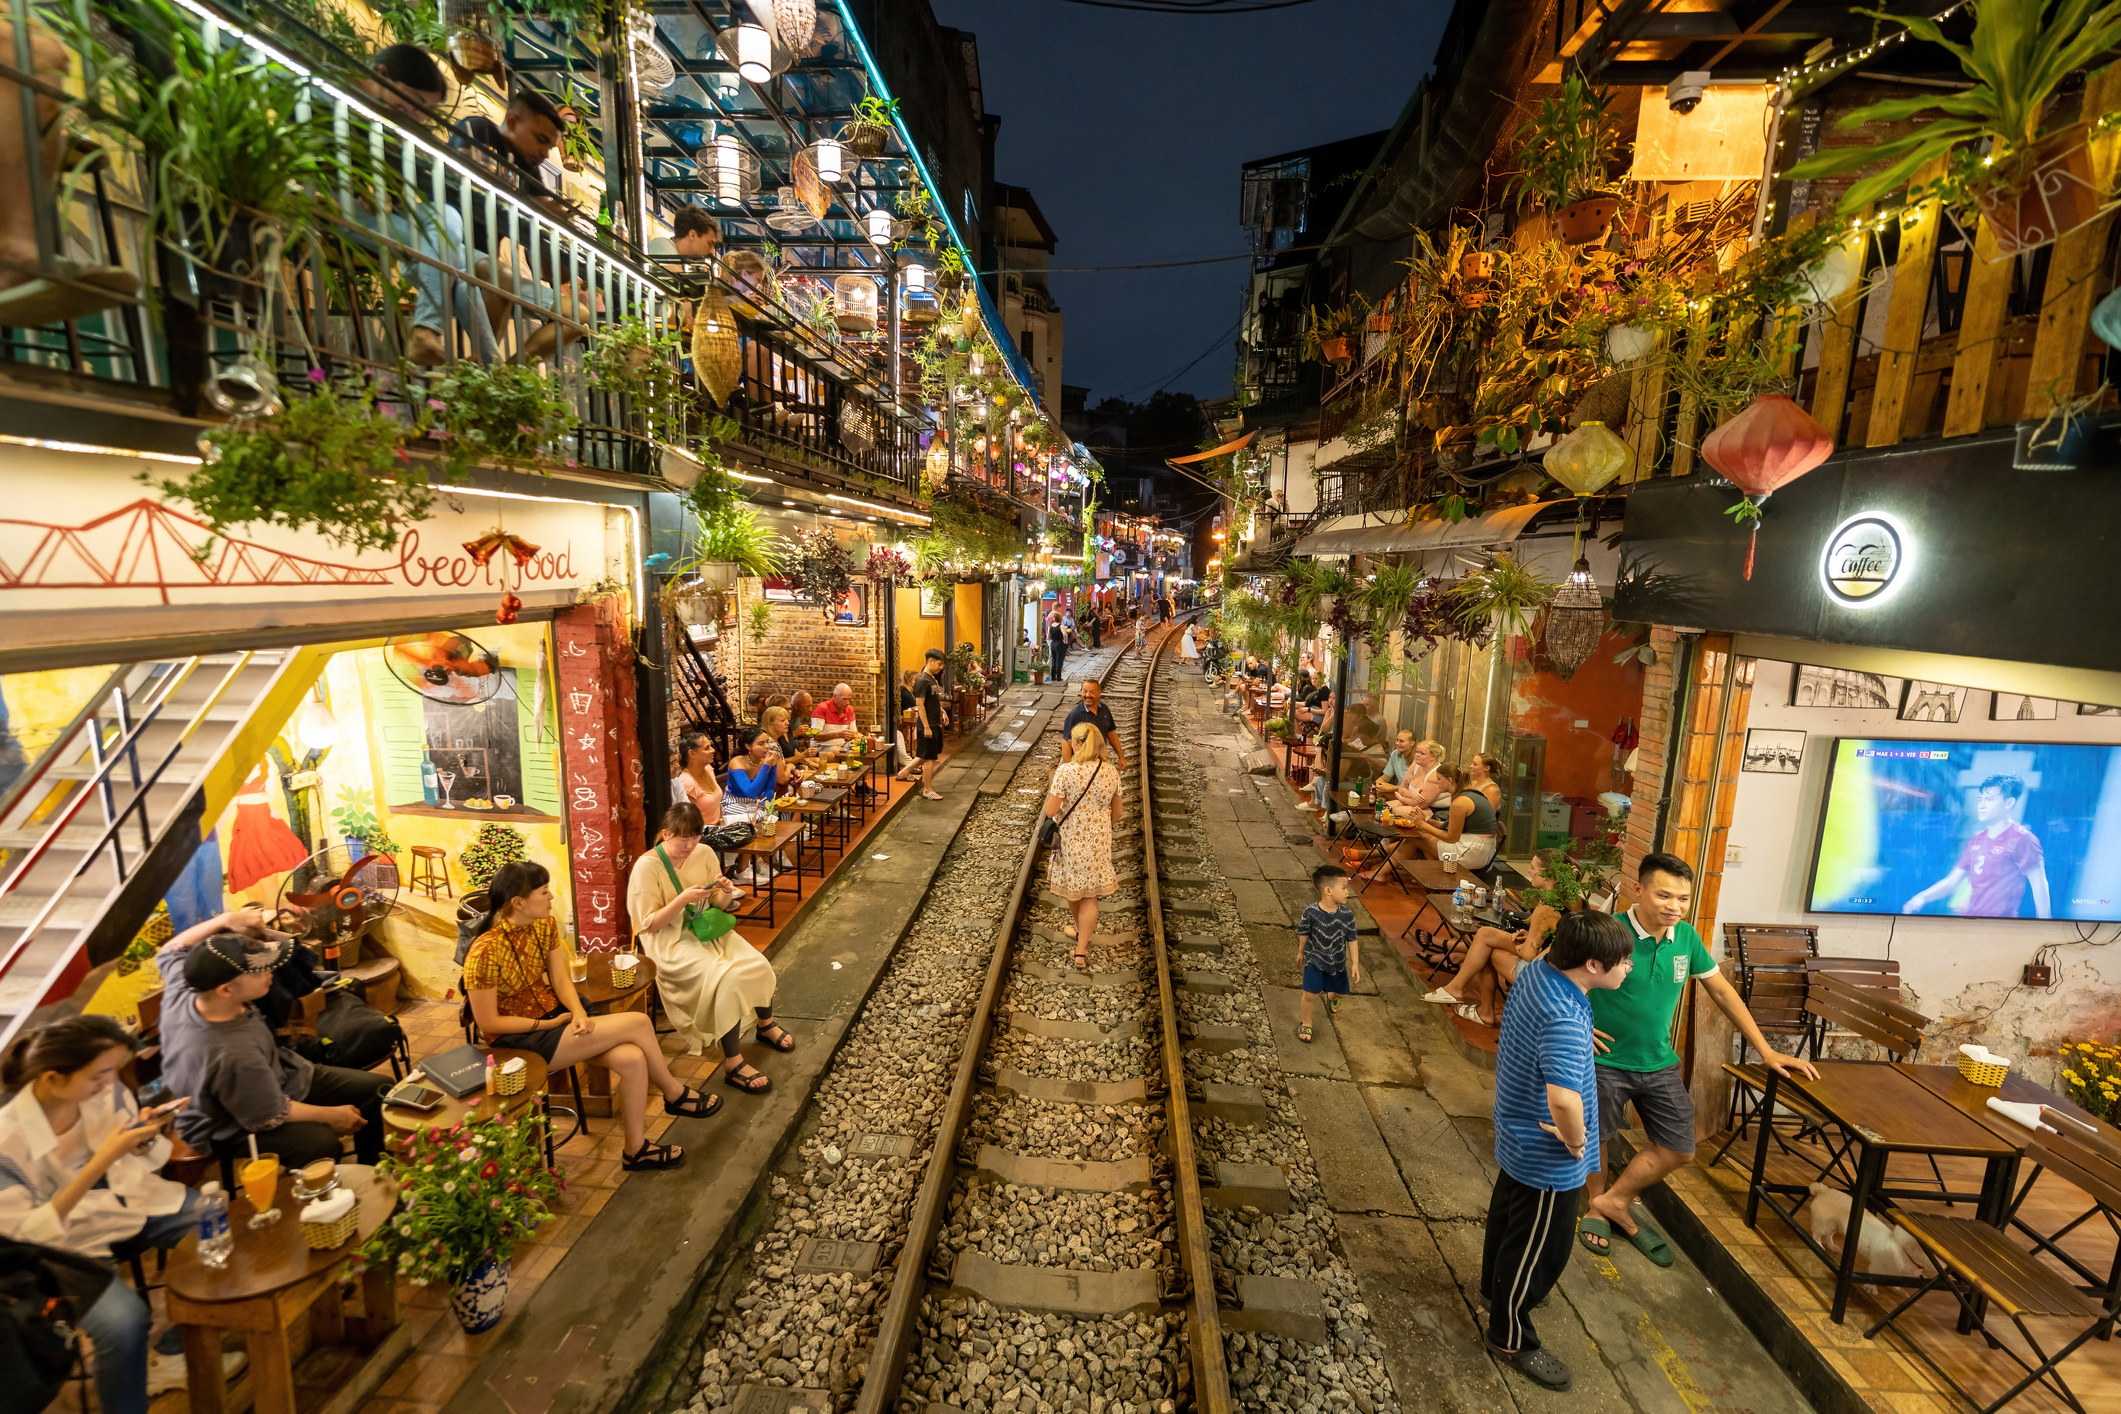 Despite a series of crackdowns, it appears business-as-usual on Train Street in Hanoi, Vietnam, on May 8, 2023. (Khoa Nguyen—Getty Images/iStock)